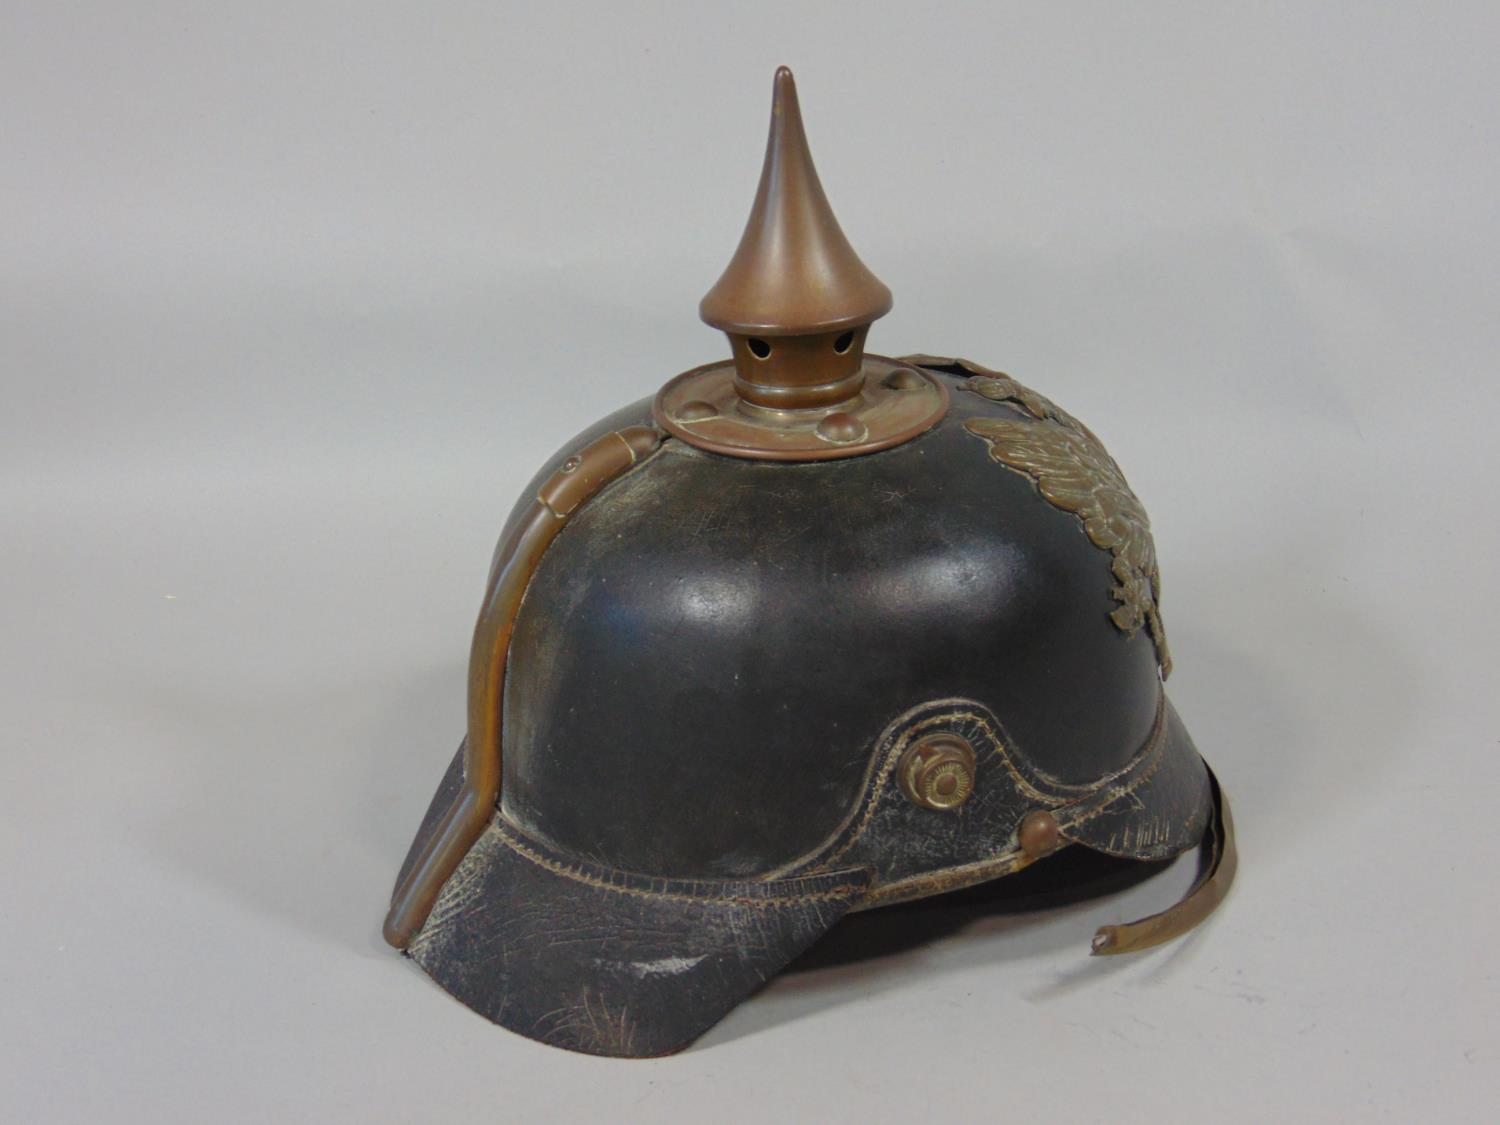 19th century German/Pussian Picklehaube helmet in black leather with a brass spike and applied crest - Image 5 of 5